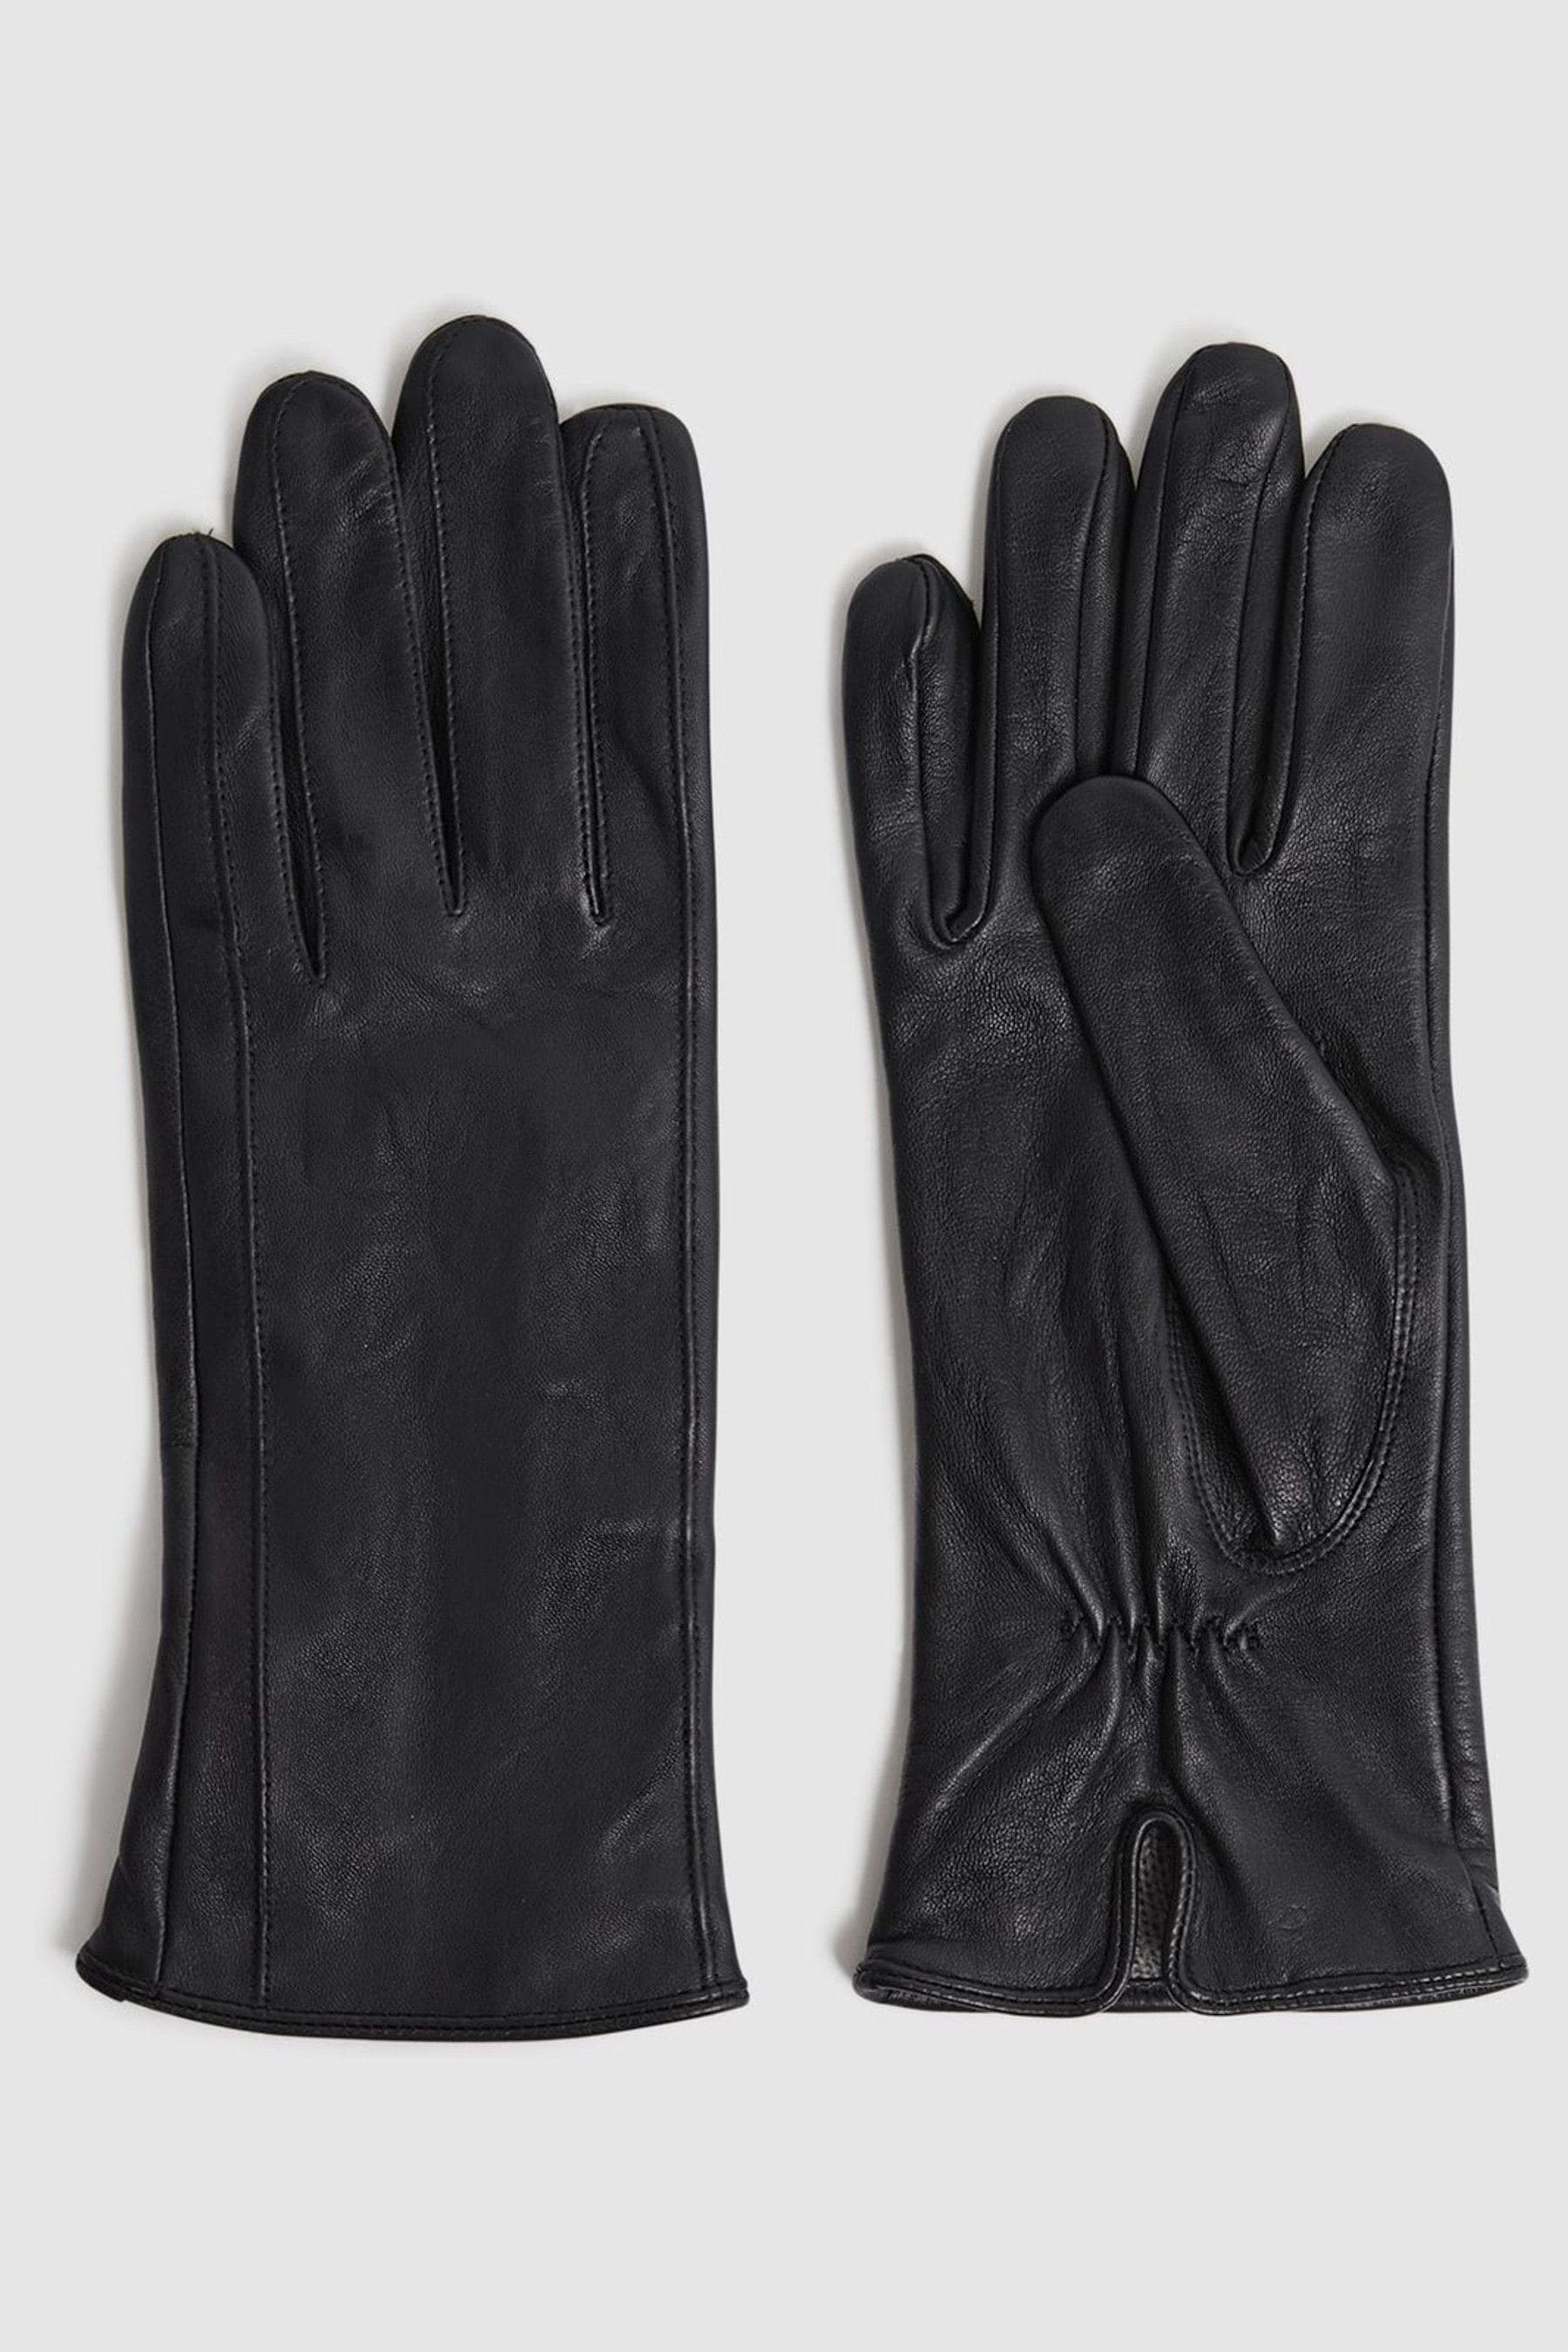 Reiss Giselle - Black Leather Ruched Gloves, Uk M-l